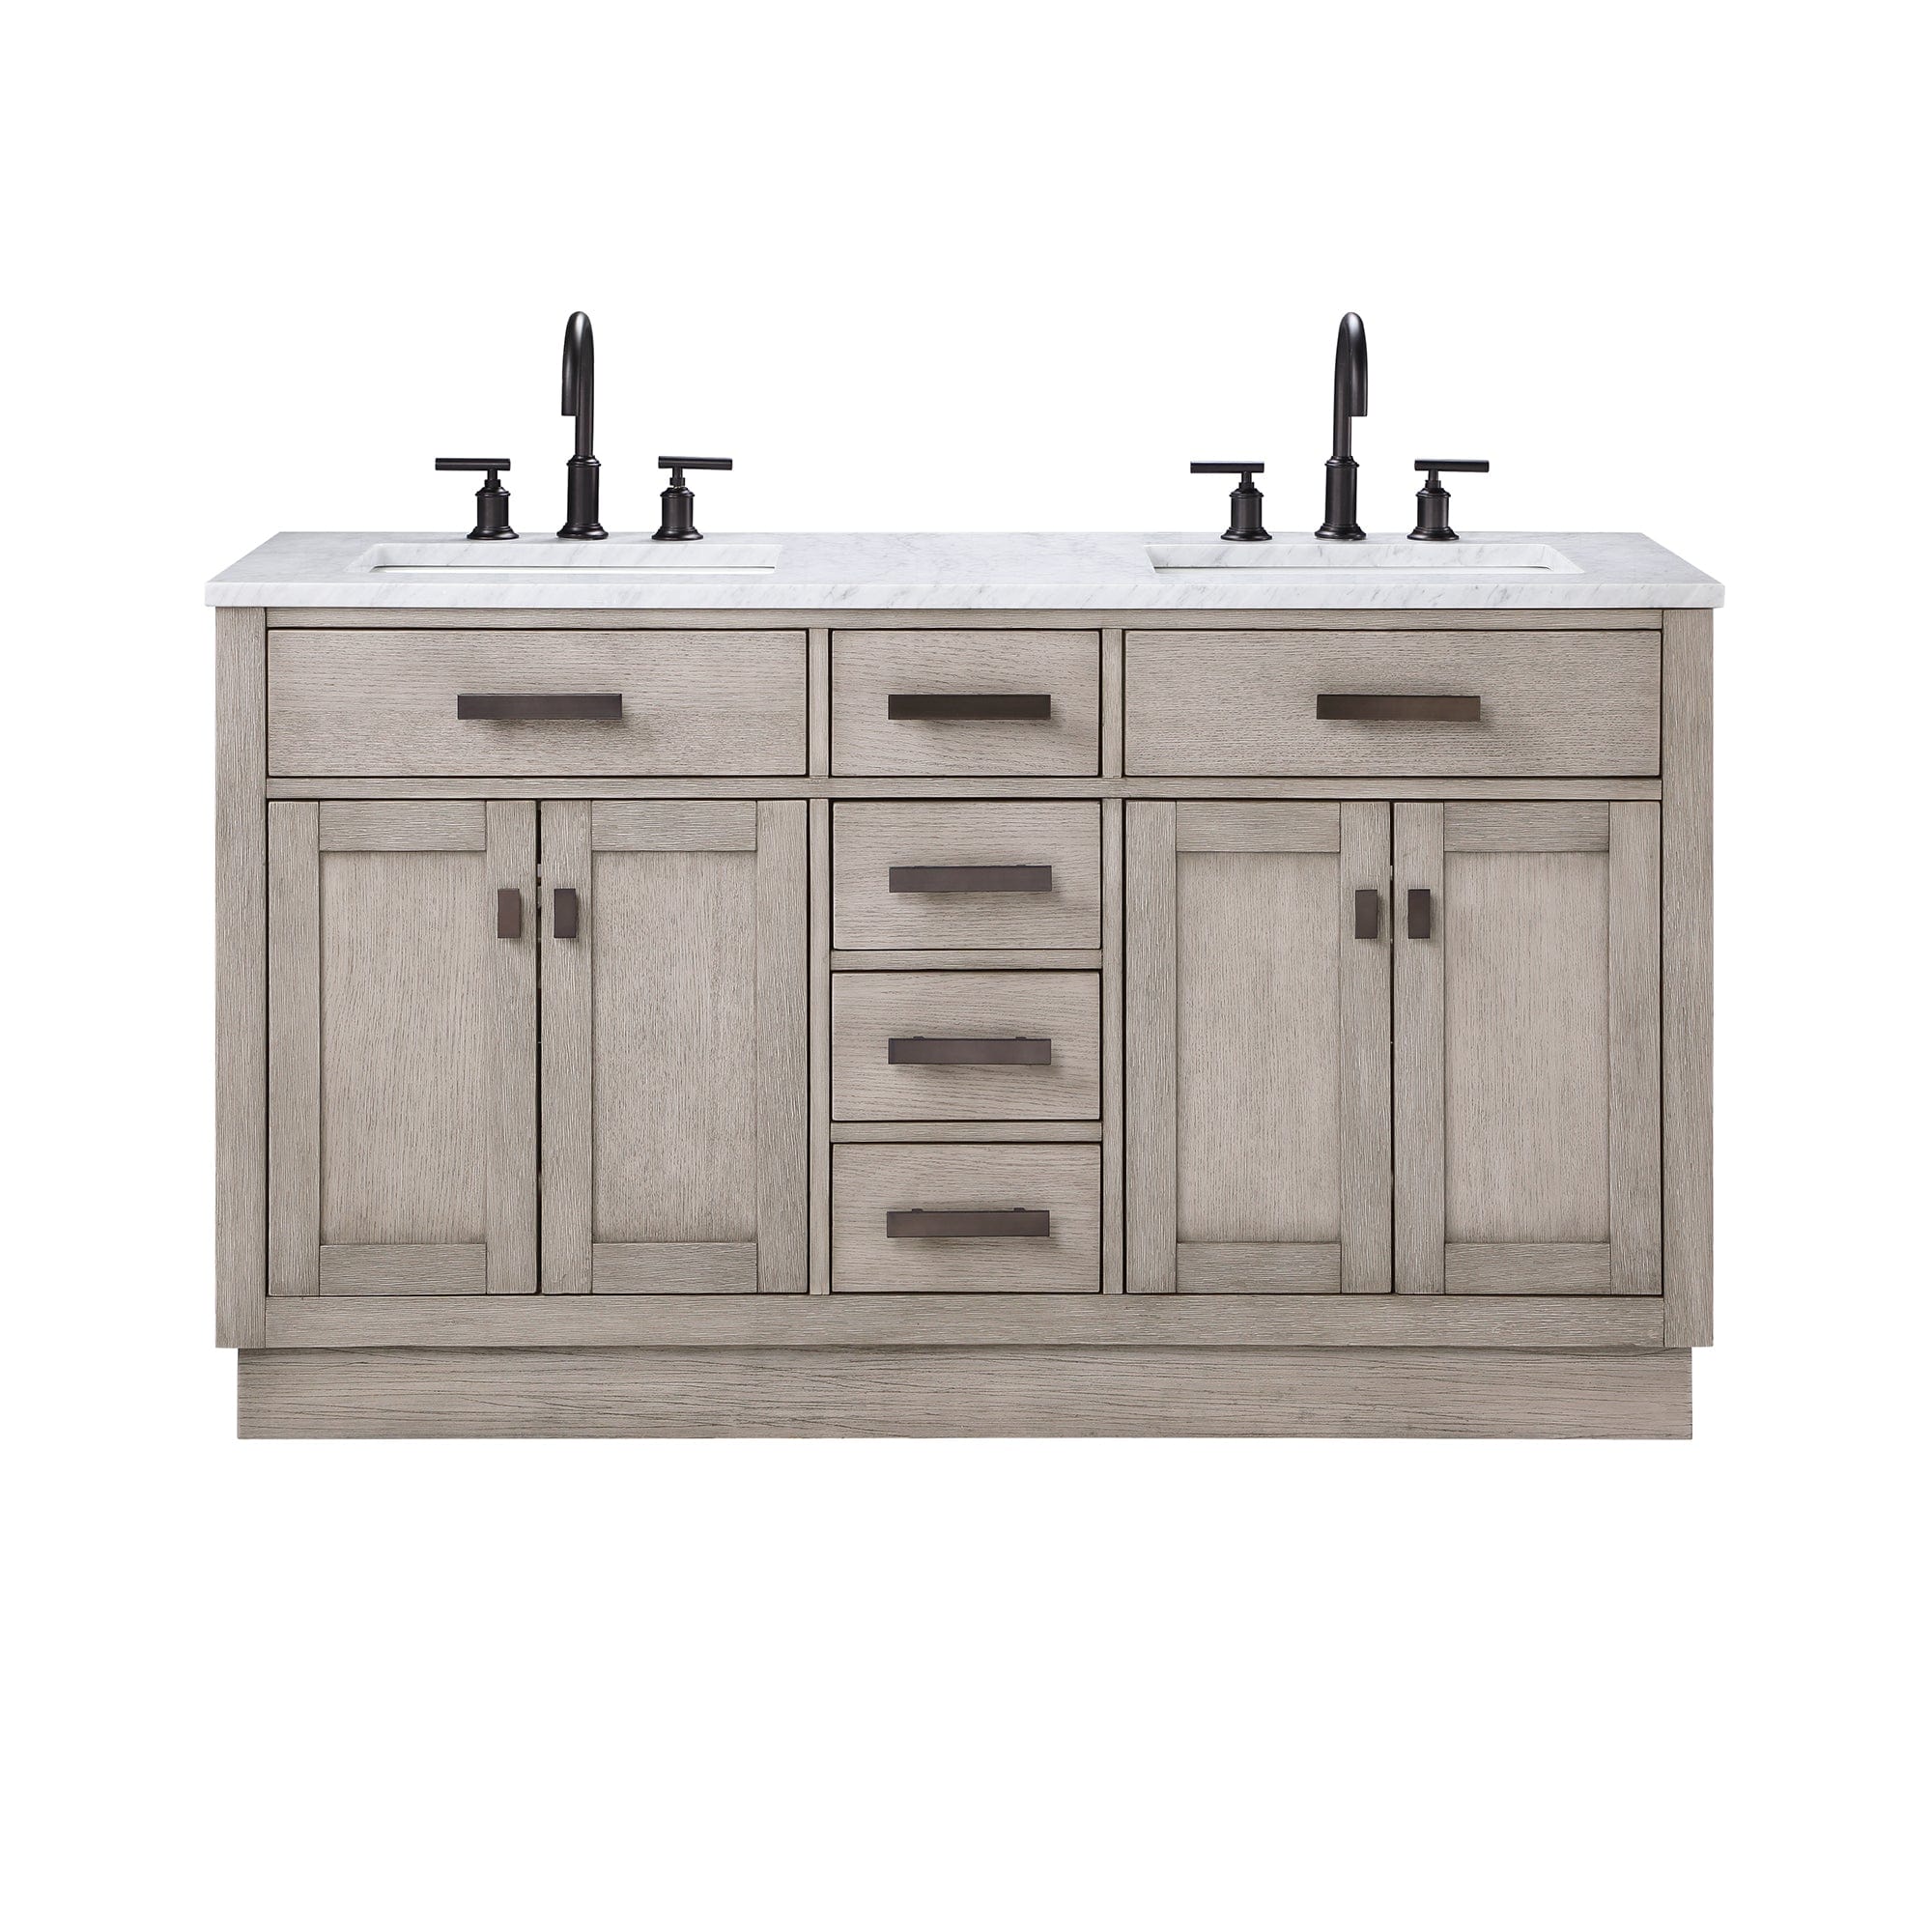 Chestnut 60 In. Double Sink Carrara White Marble Countertop Vanity In Grey Oak with Grooseneck Faucets - Molaix732030764811CH60CW03GK-000BL1403